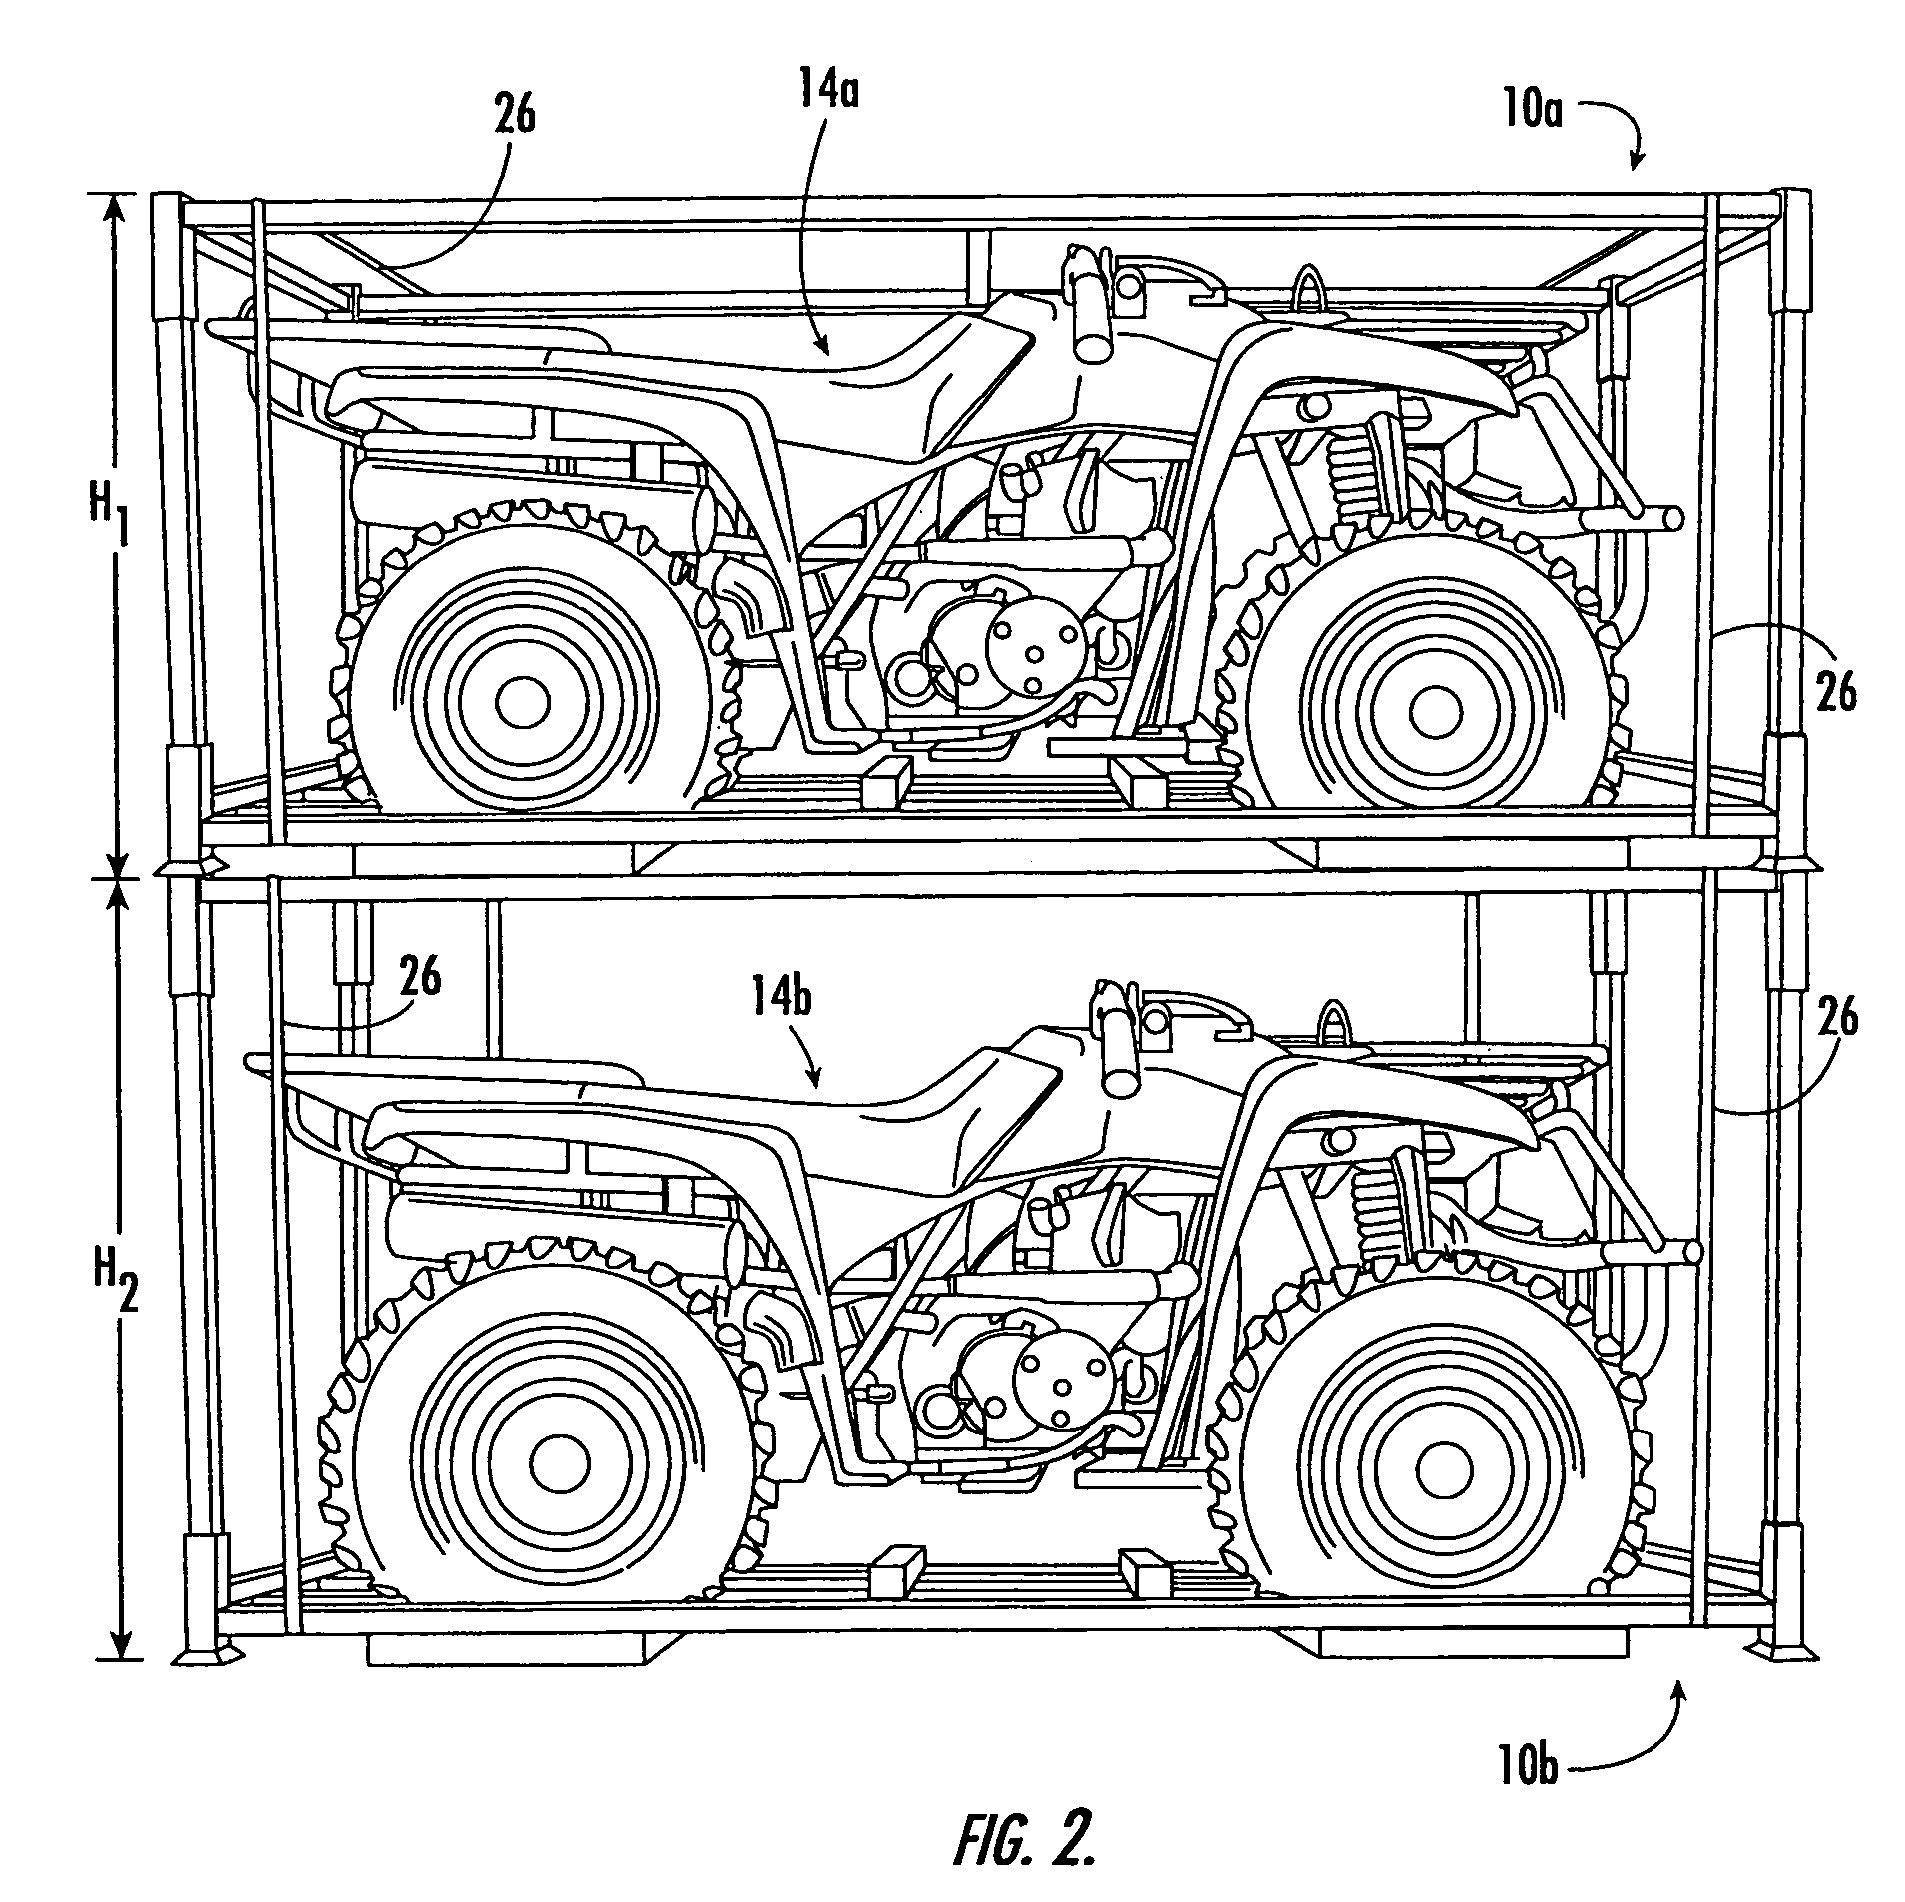 All-terrain vehicle shipping package